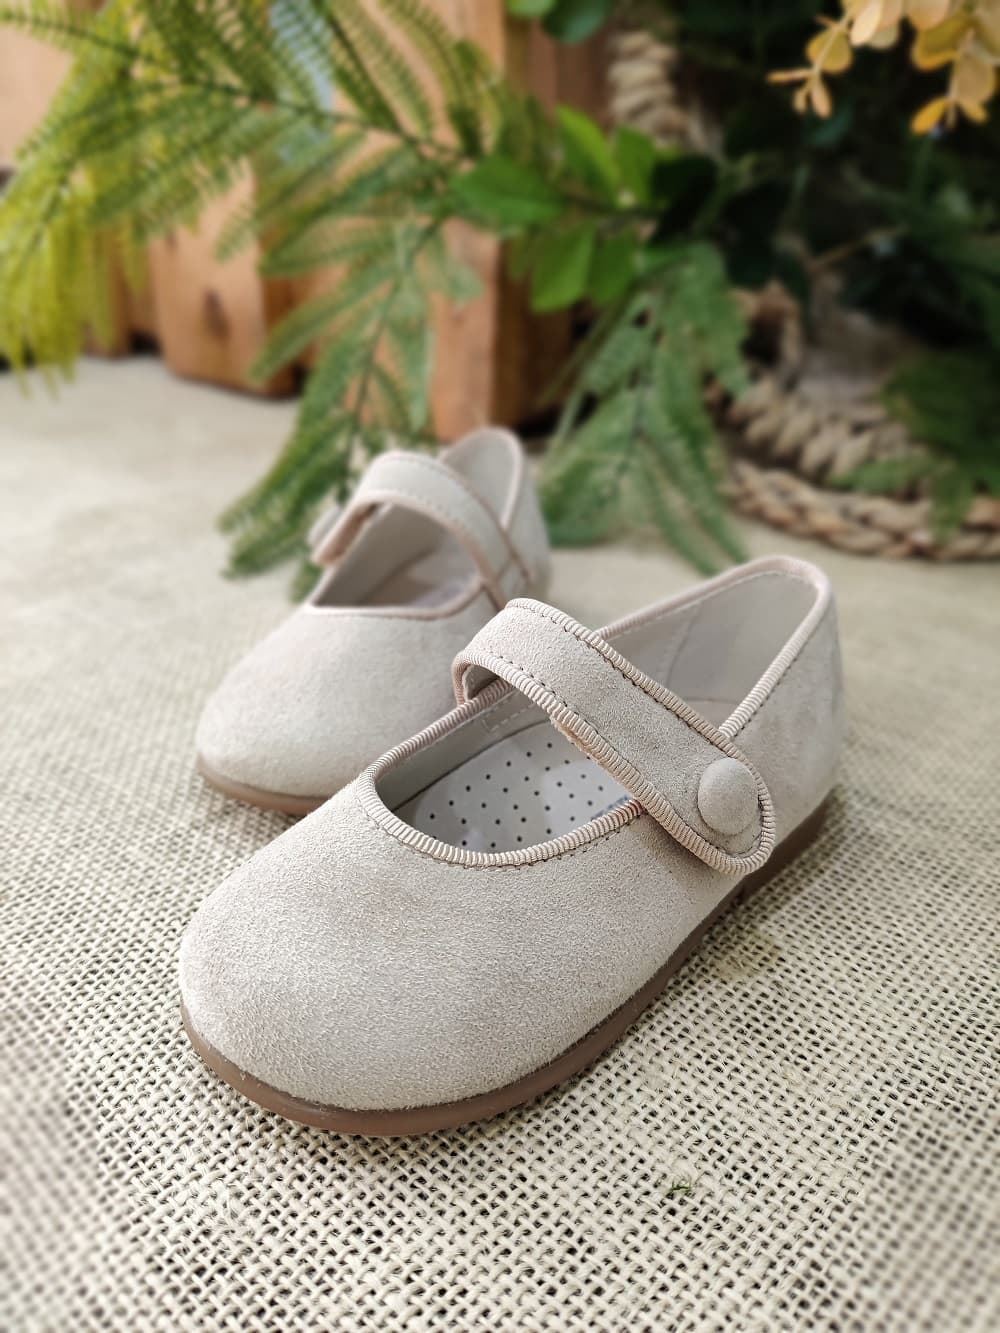 Pirufin (Piruflex) Mary Janes for baby girls in Taupe suede - Image 5